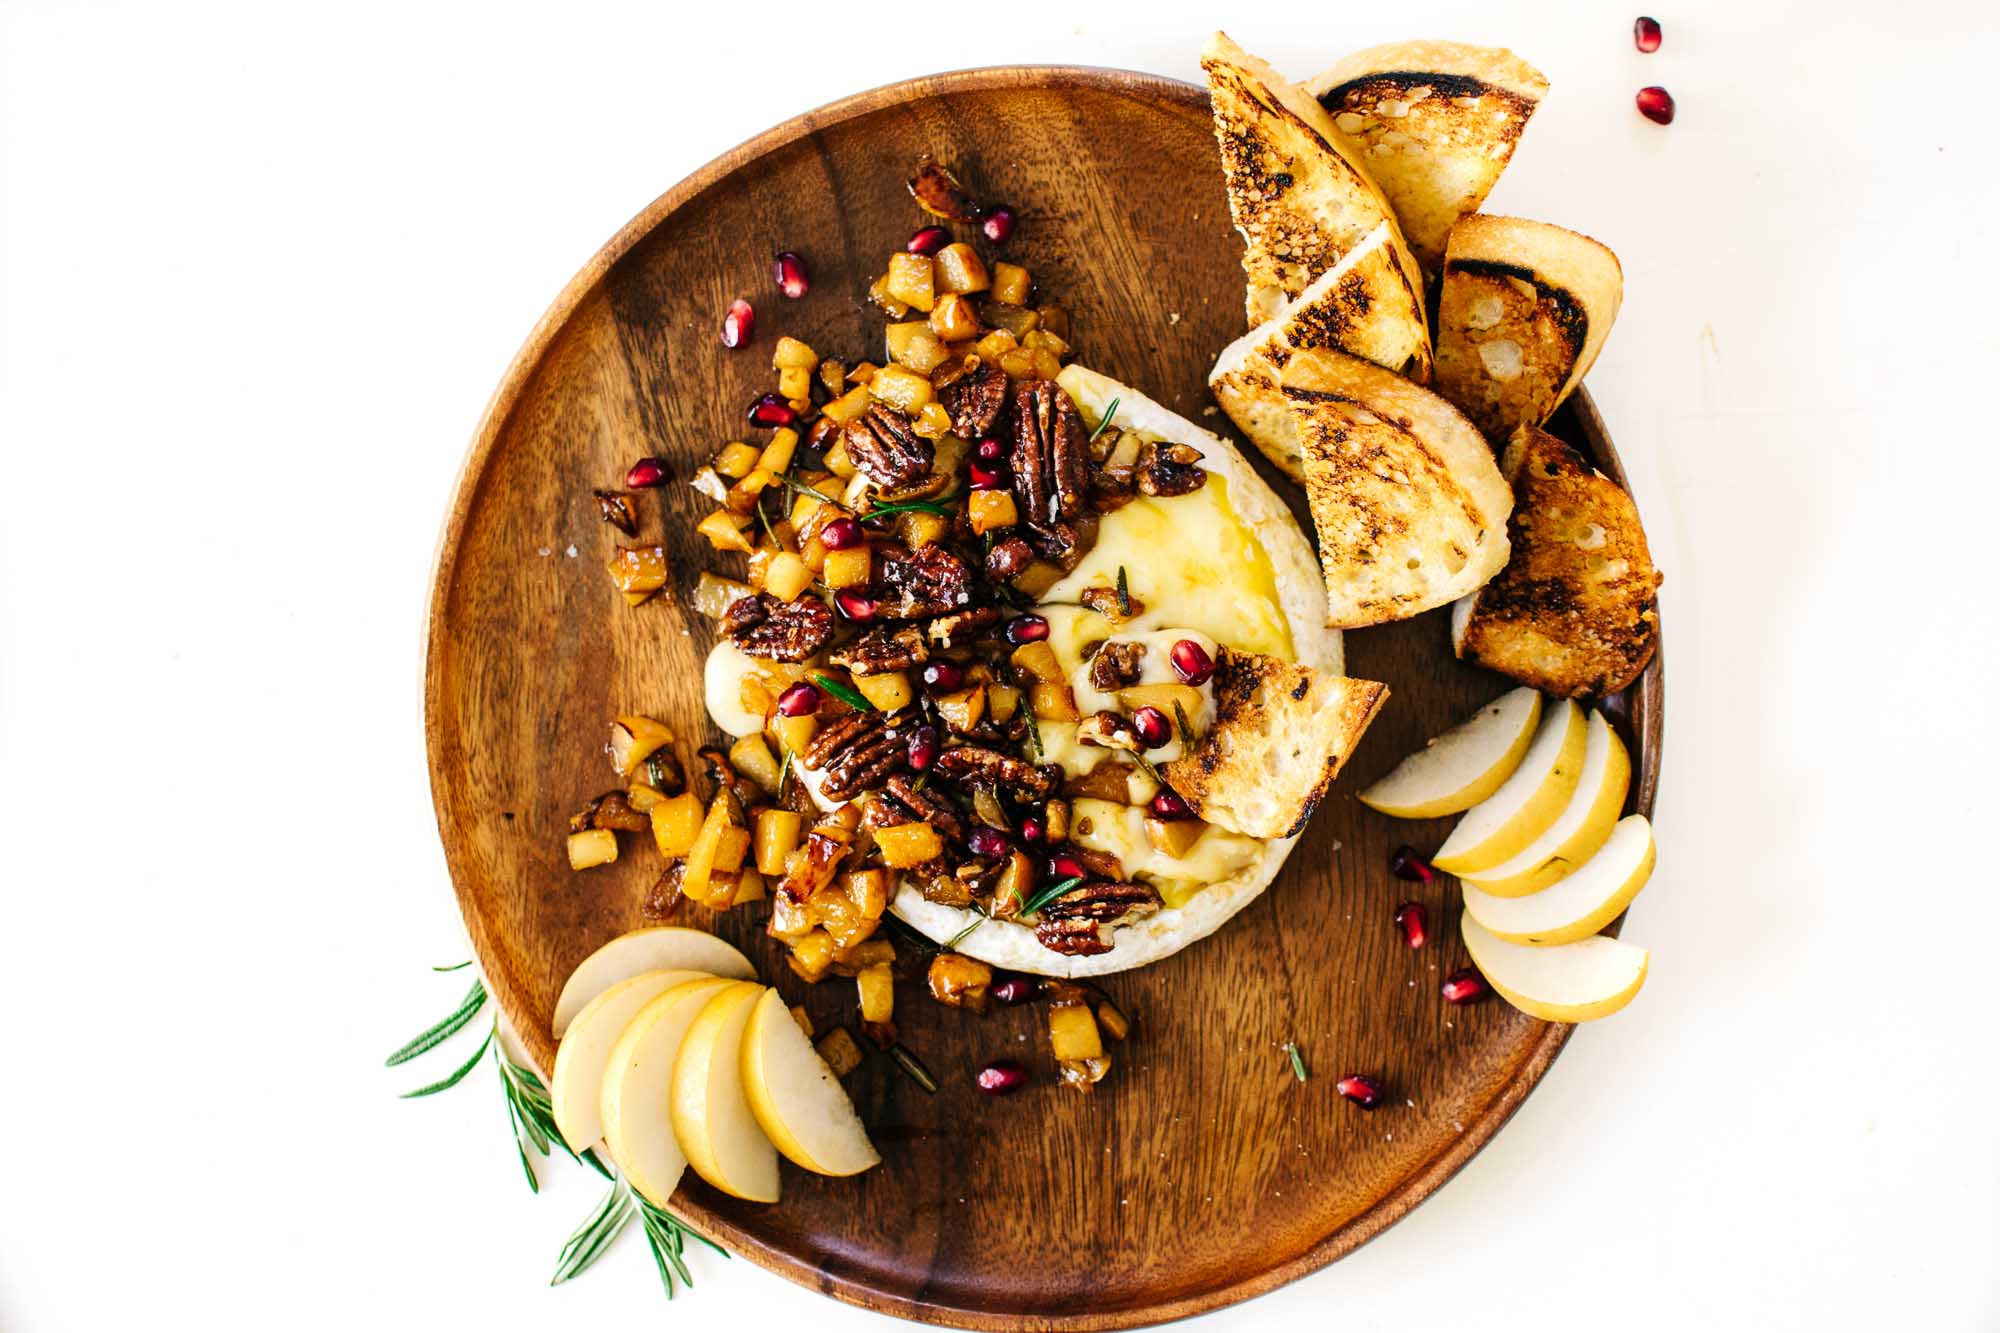 MAPLE-ROSEMARY PEAR & PECAN BAKED BRIE.